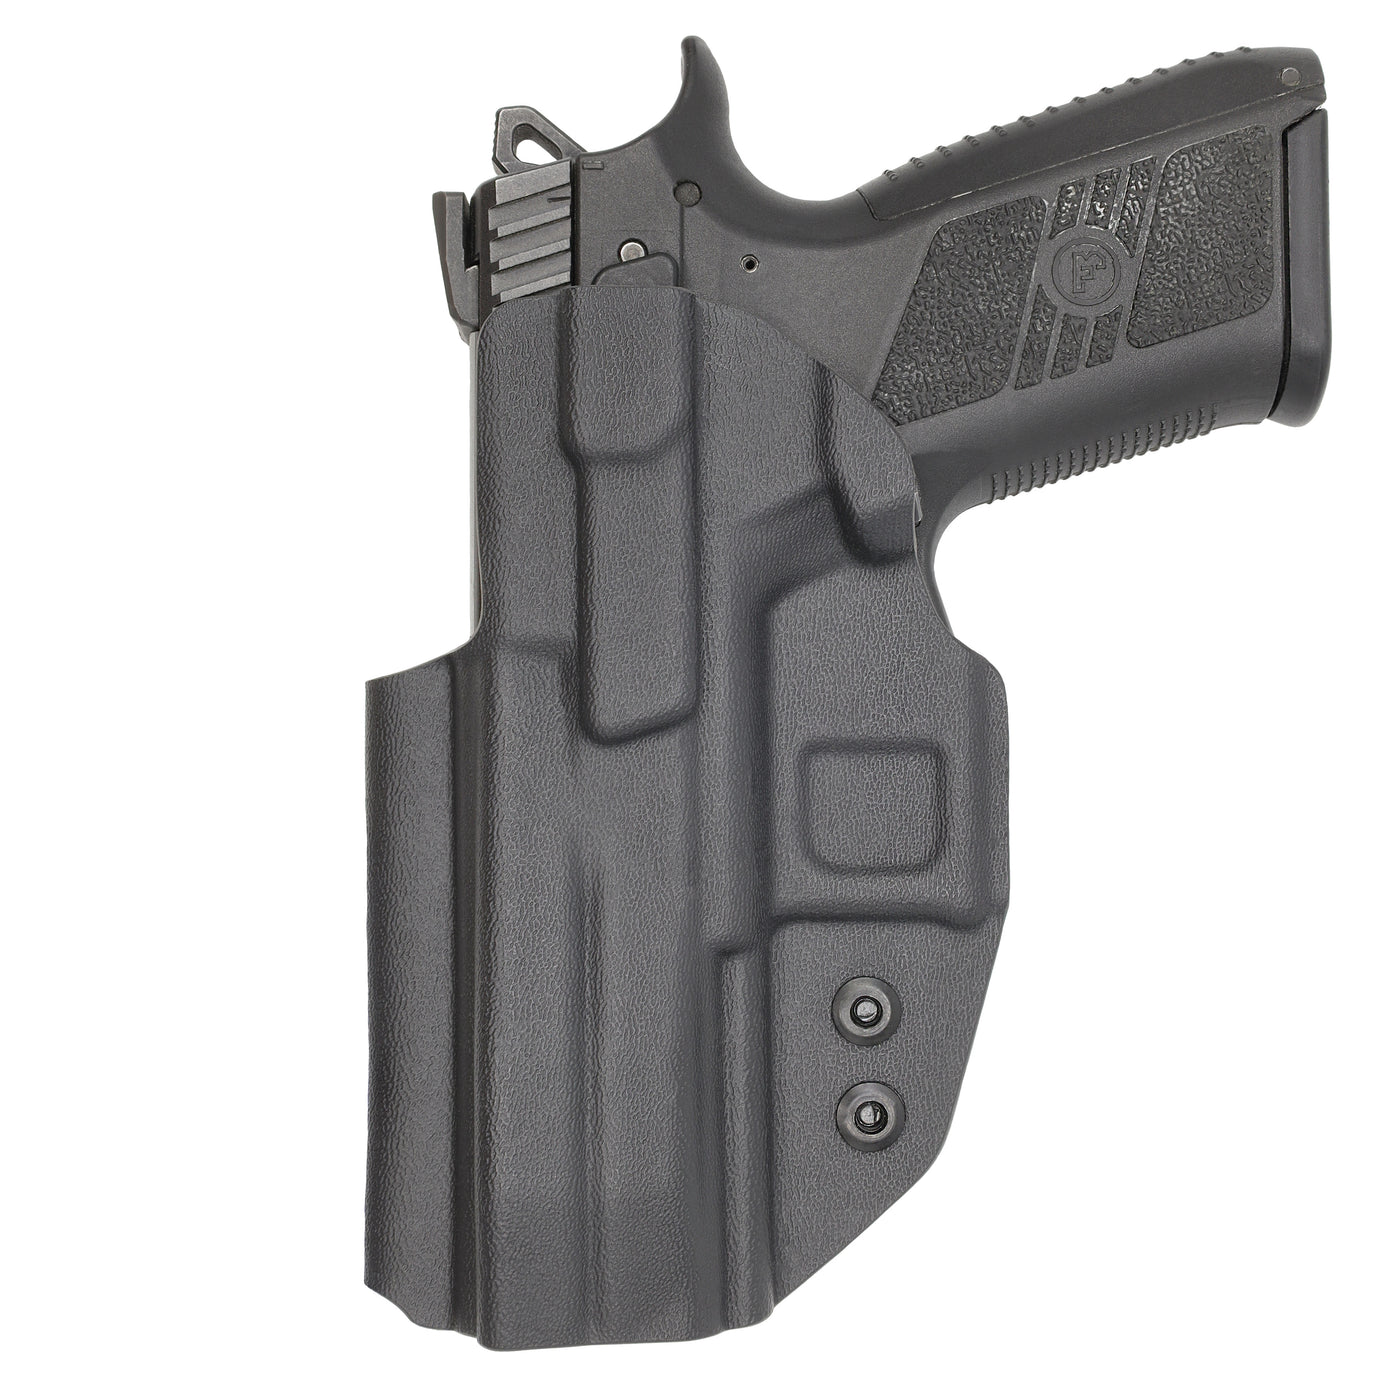 C&G Holsters Quickship IWB Covert CZ P07 in holstered position back view